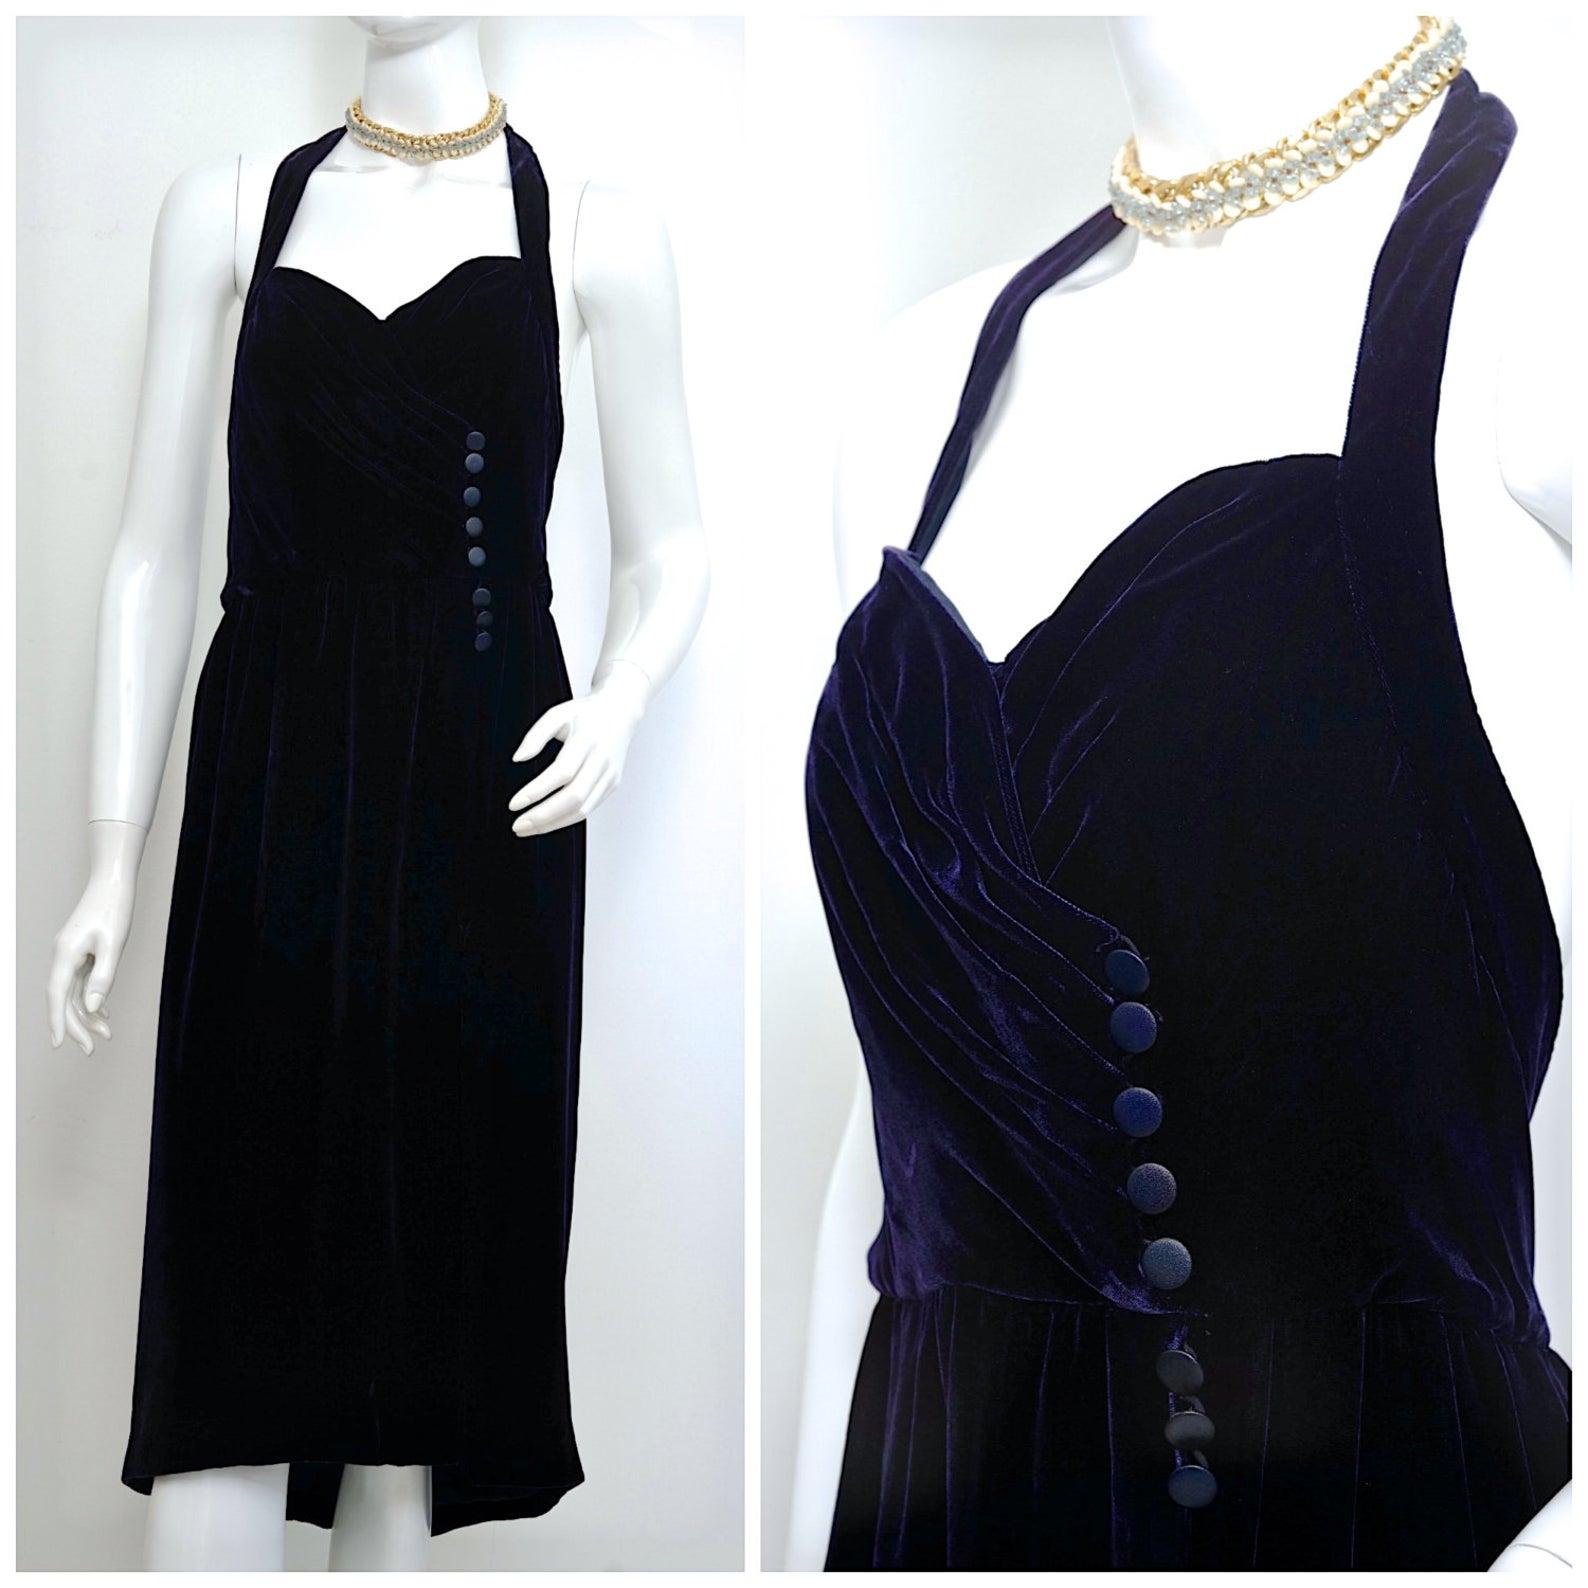 Vintage CHANEL BOUTIQUE Velvet Halter Formal Dress

Measurements taken laid flat, please double waist and hips:
Bust: 17 4/8 inches
Waist: 14 inches
Hips: 19 inches
Length: 43 inches (front)
47 inches (back)

Features
- 100% Authentic CHANEL